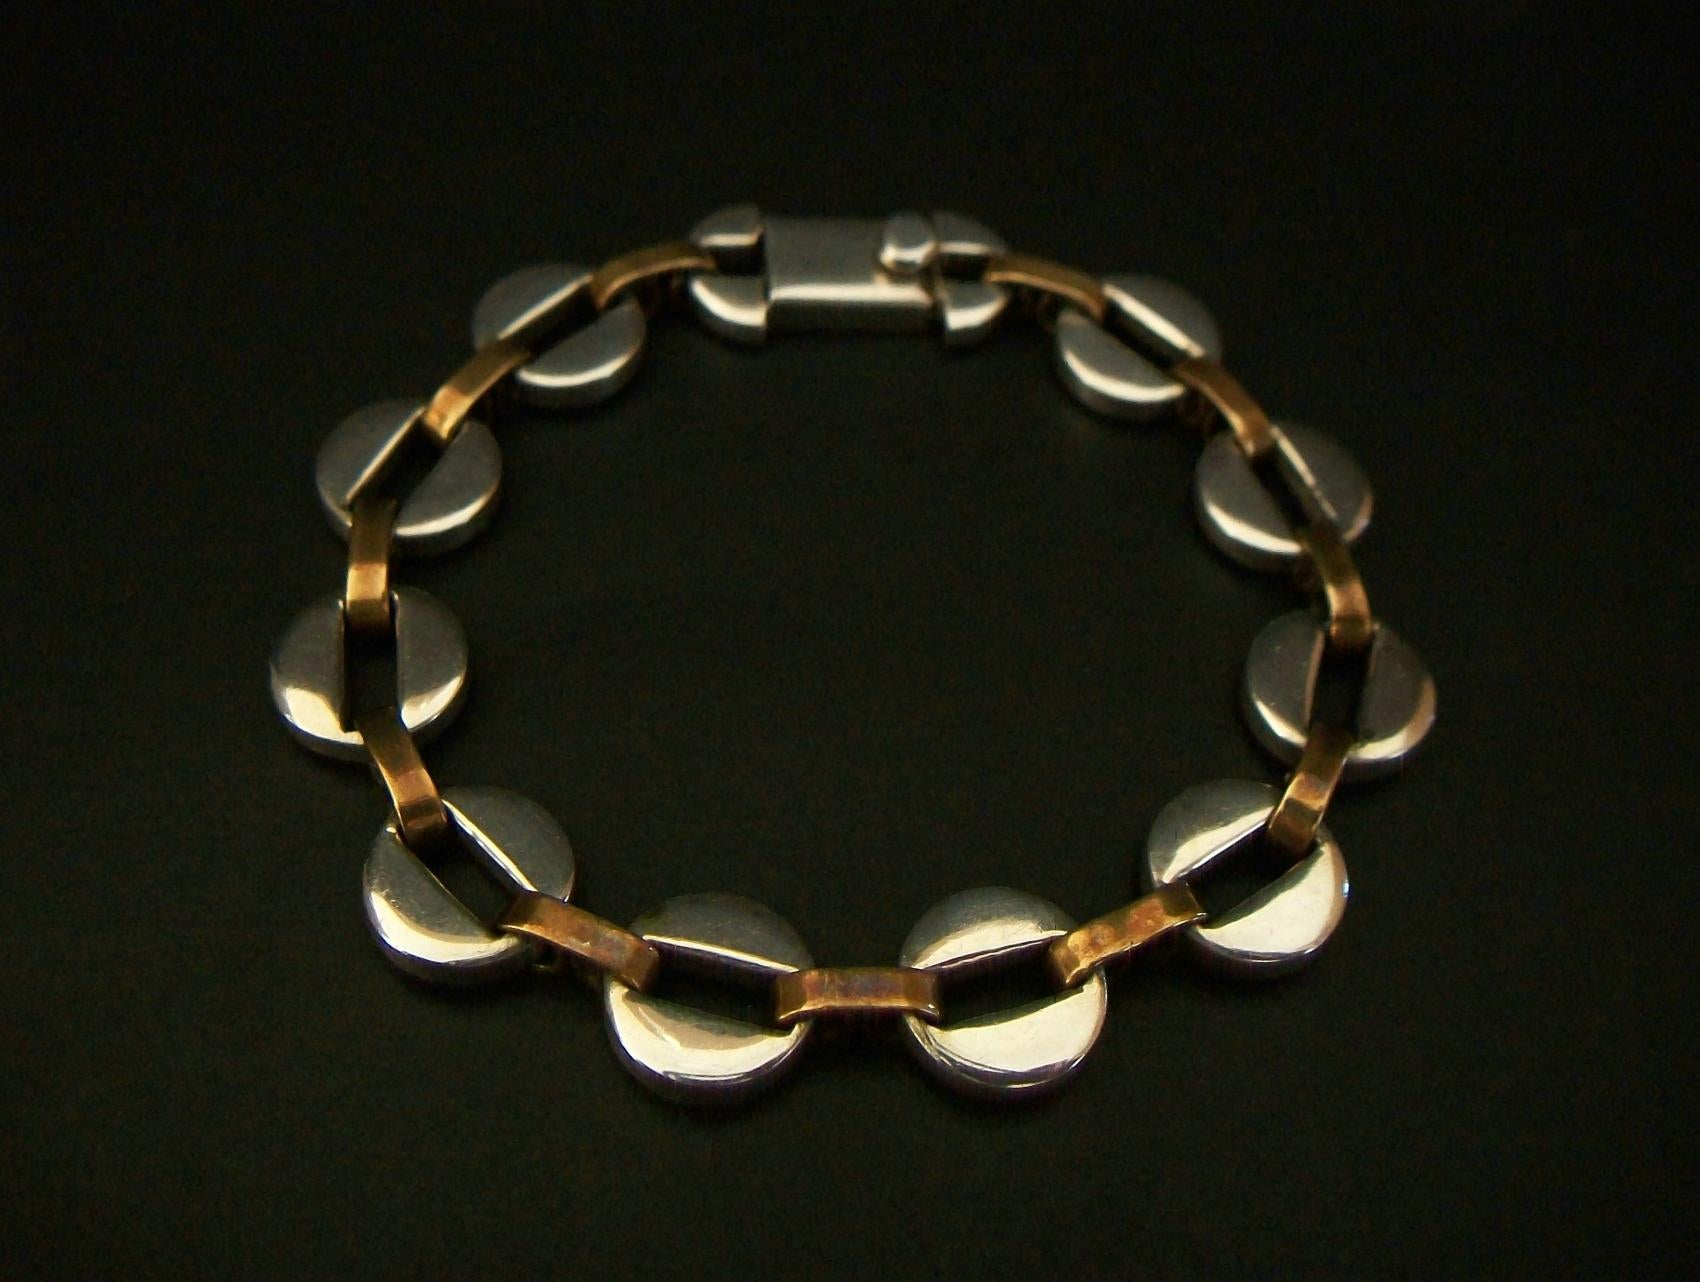 T. CALOS - Mid Century Taxco sterling silver & copper bracelet - fine quality - warm aged patina - hand made box clasp / closure - signed and stamped 925 on the clasp - Mexico - circa 1960's.

Excellent vintage condition - all original - no loss -